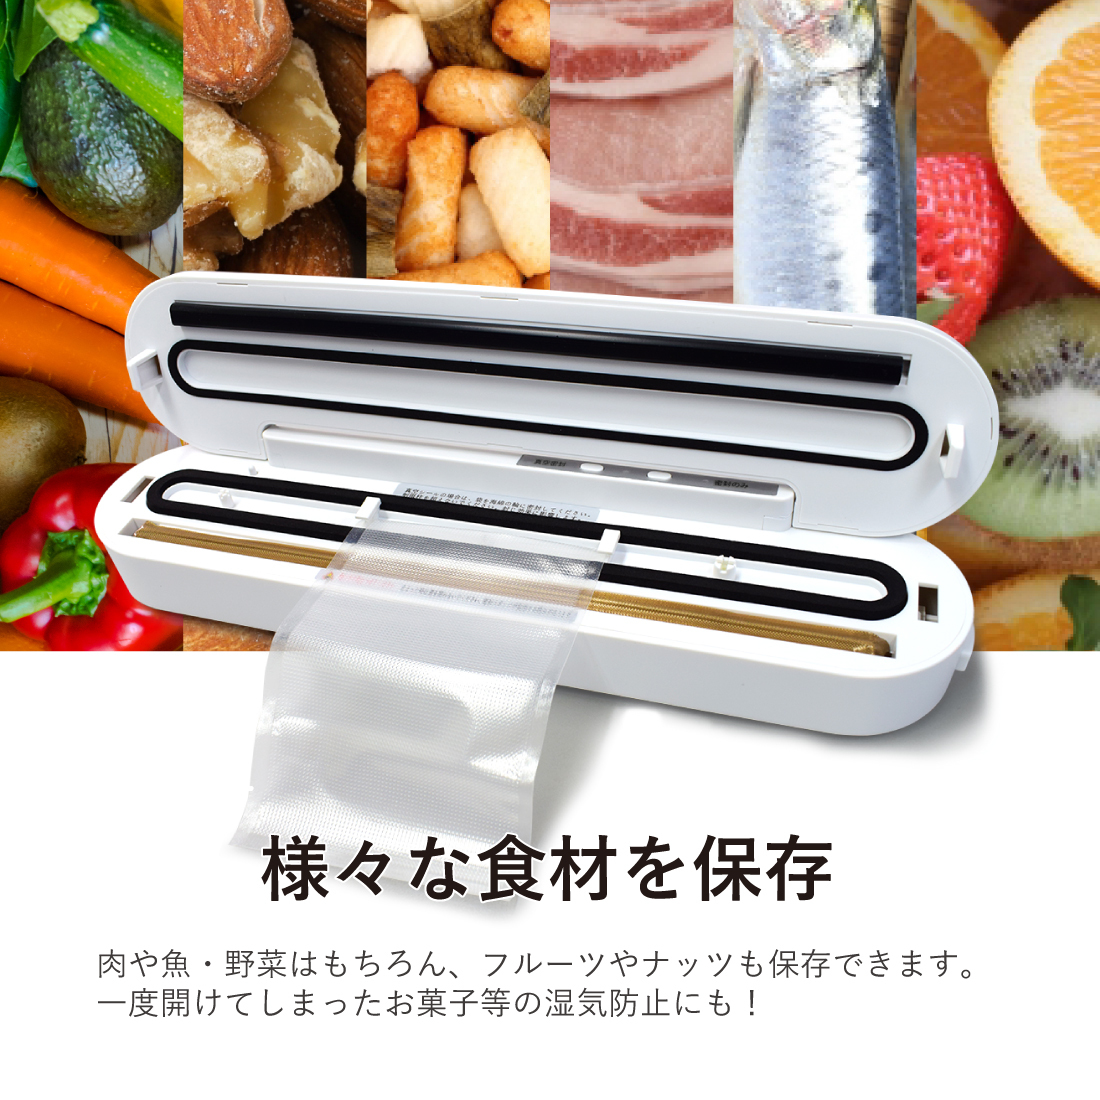  vacuum pack machine small size sealing coat continuation seal possibility food sealing coat machine home use business use vacuum packaging machine easy operation 60Kpa absorption power exclusive use pack sack attaching Japanese owner manual attaching .